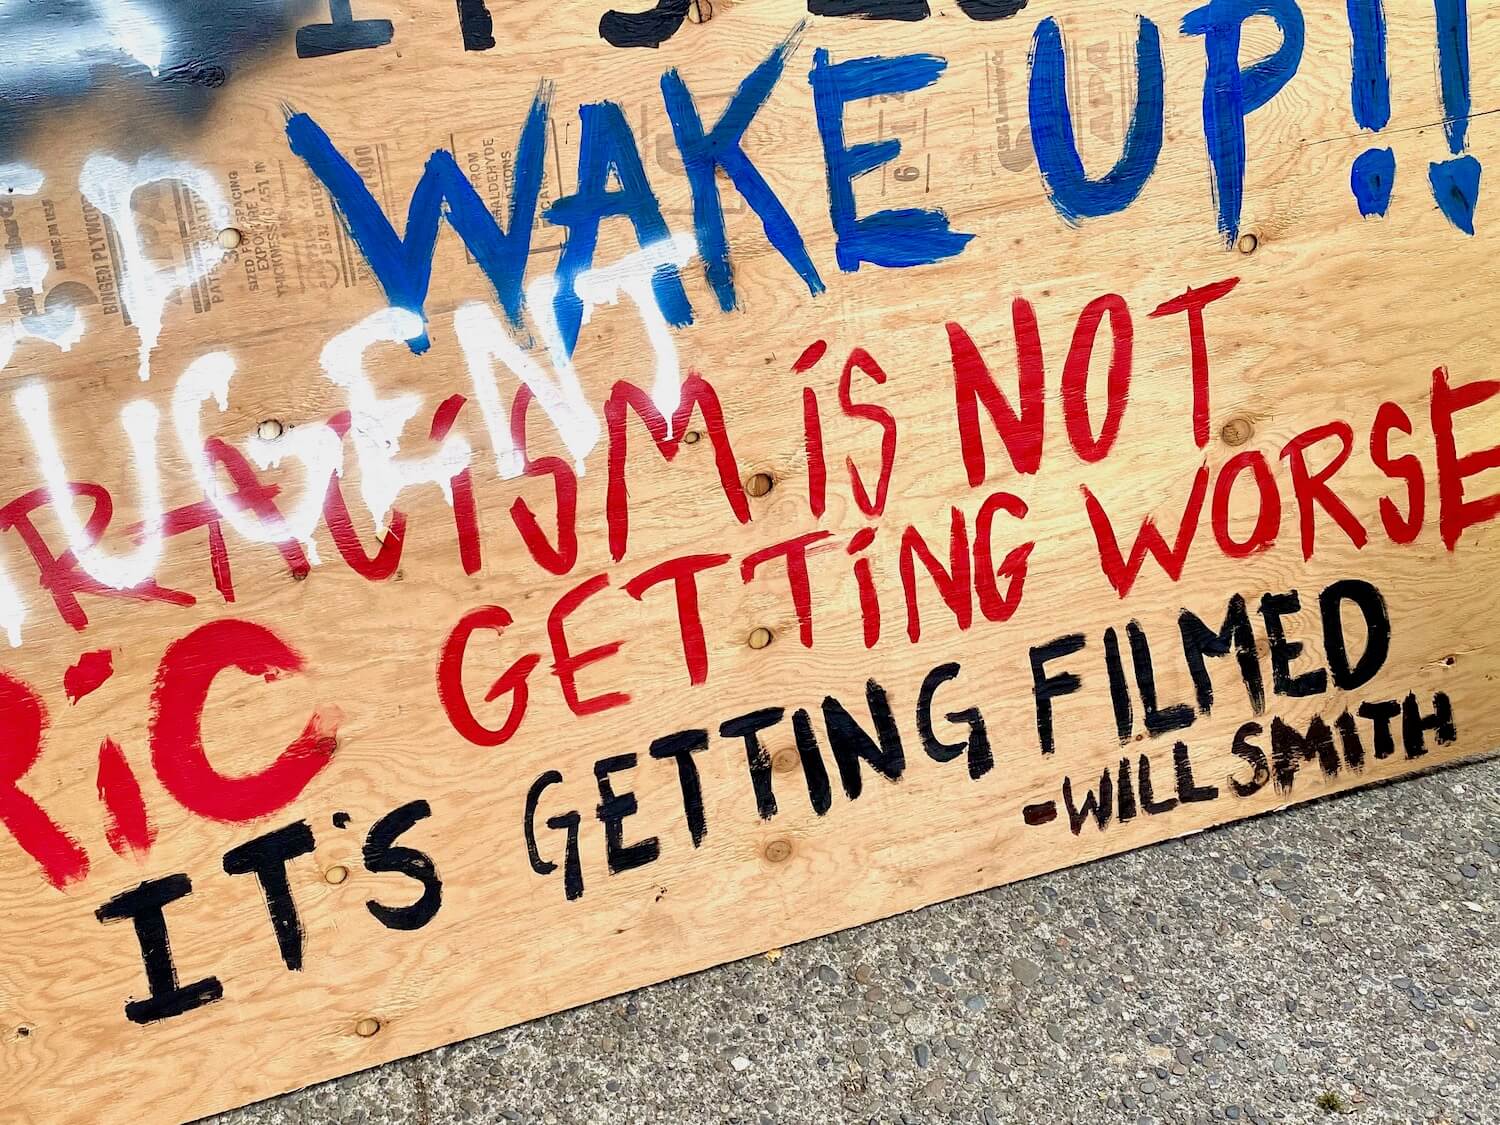 This plywood sign is in the CHOP area of Capitol Hill during the Black Lives Matter protest. The plywood is painted with blue letters that say, Wake up and red letters that say, Racism is not getting worse, it's getting filmed. By Will Smith.